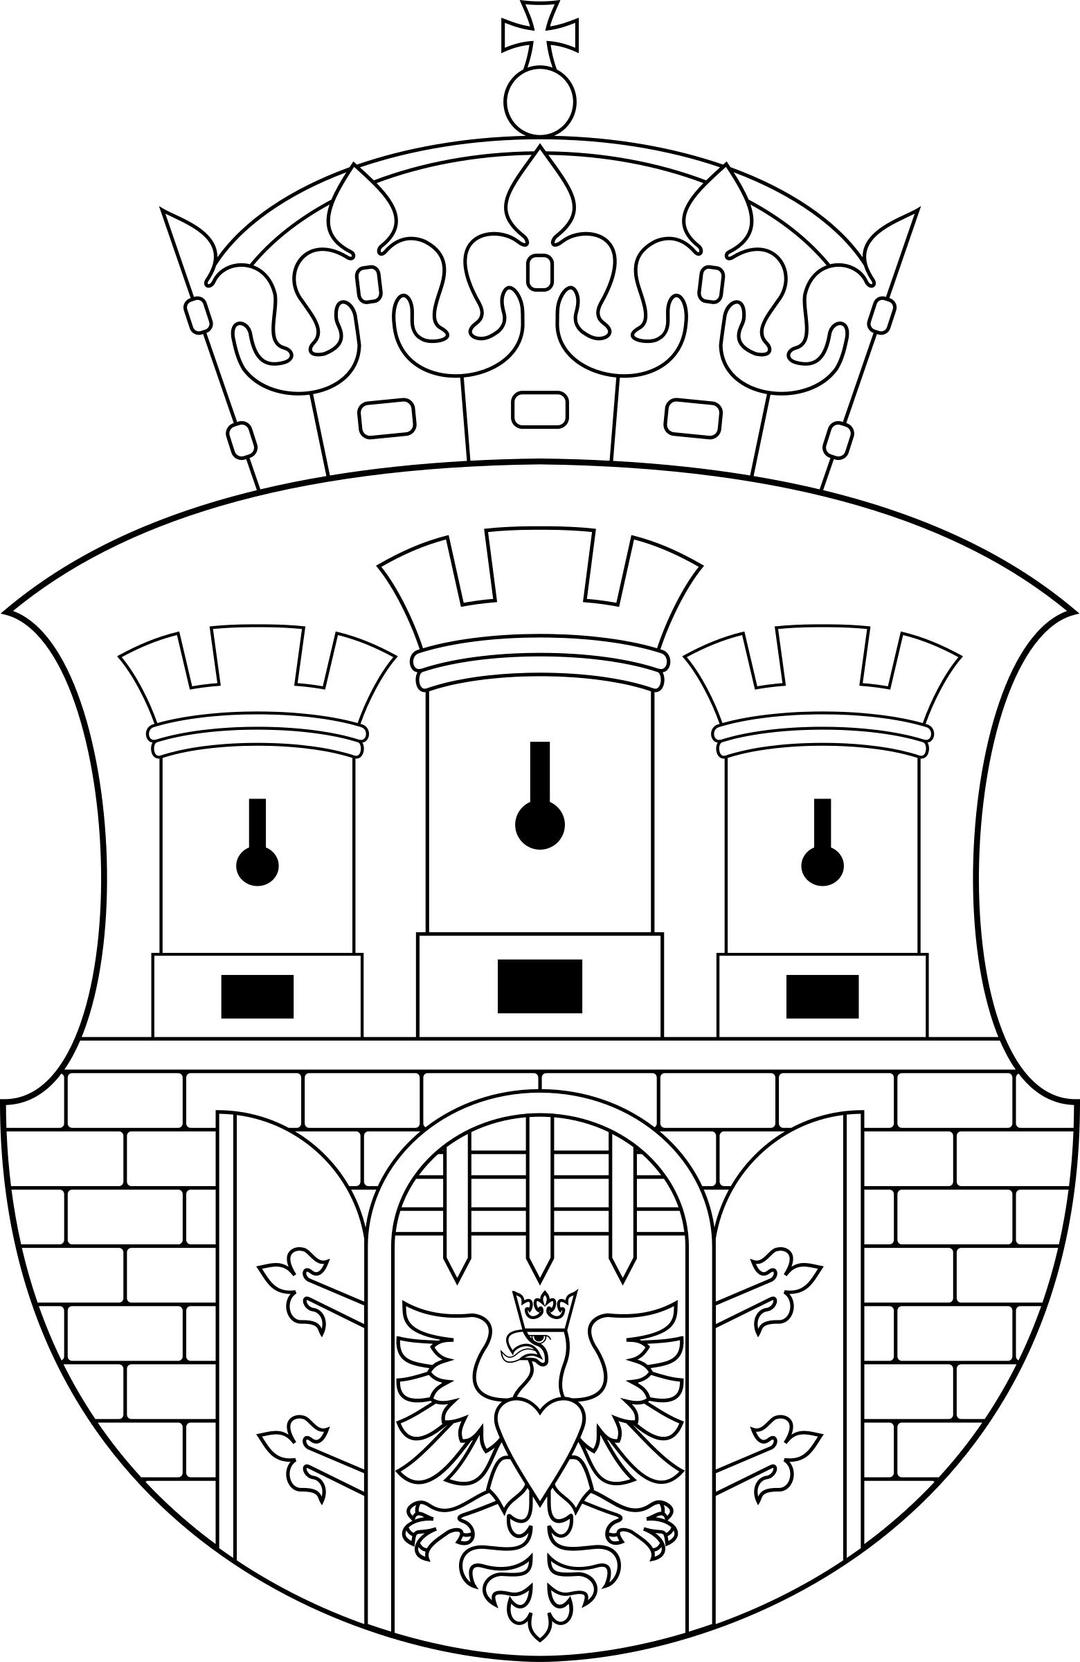 Coat of Arms of Cracow - lineart png transparent